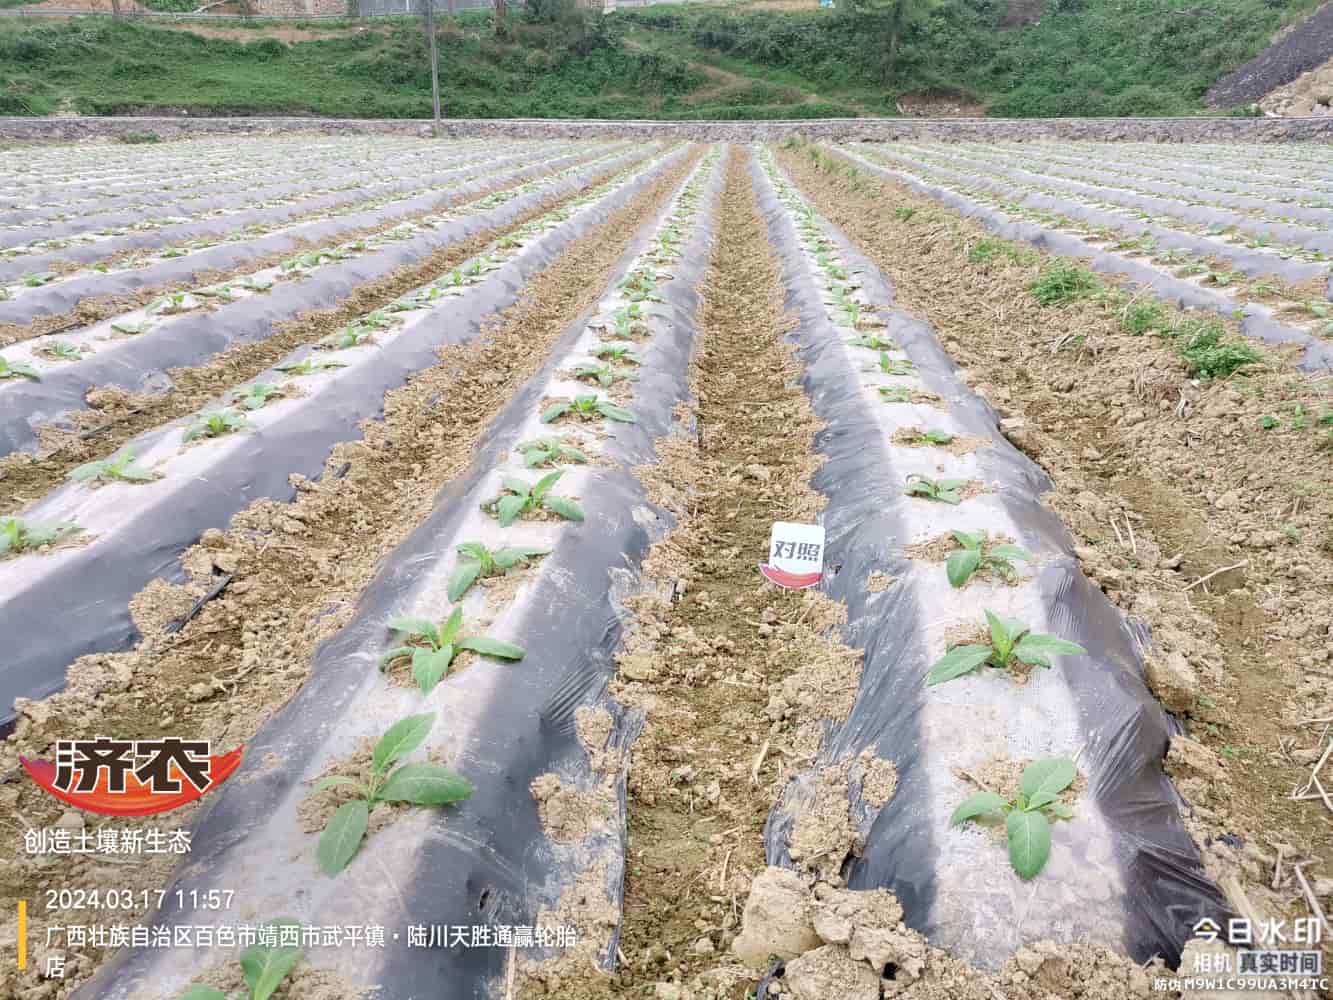 The effect of using agricultural products in Guangxi(图2)